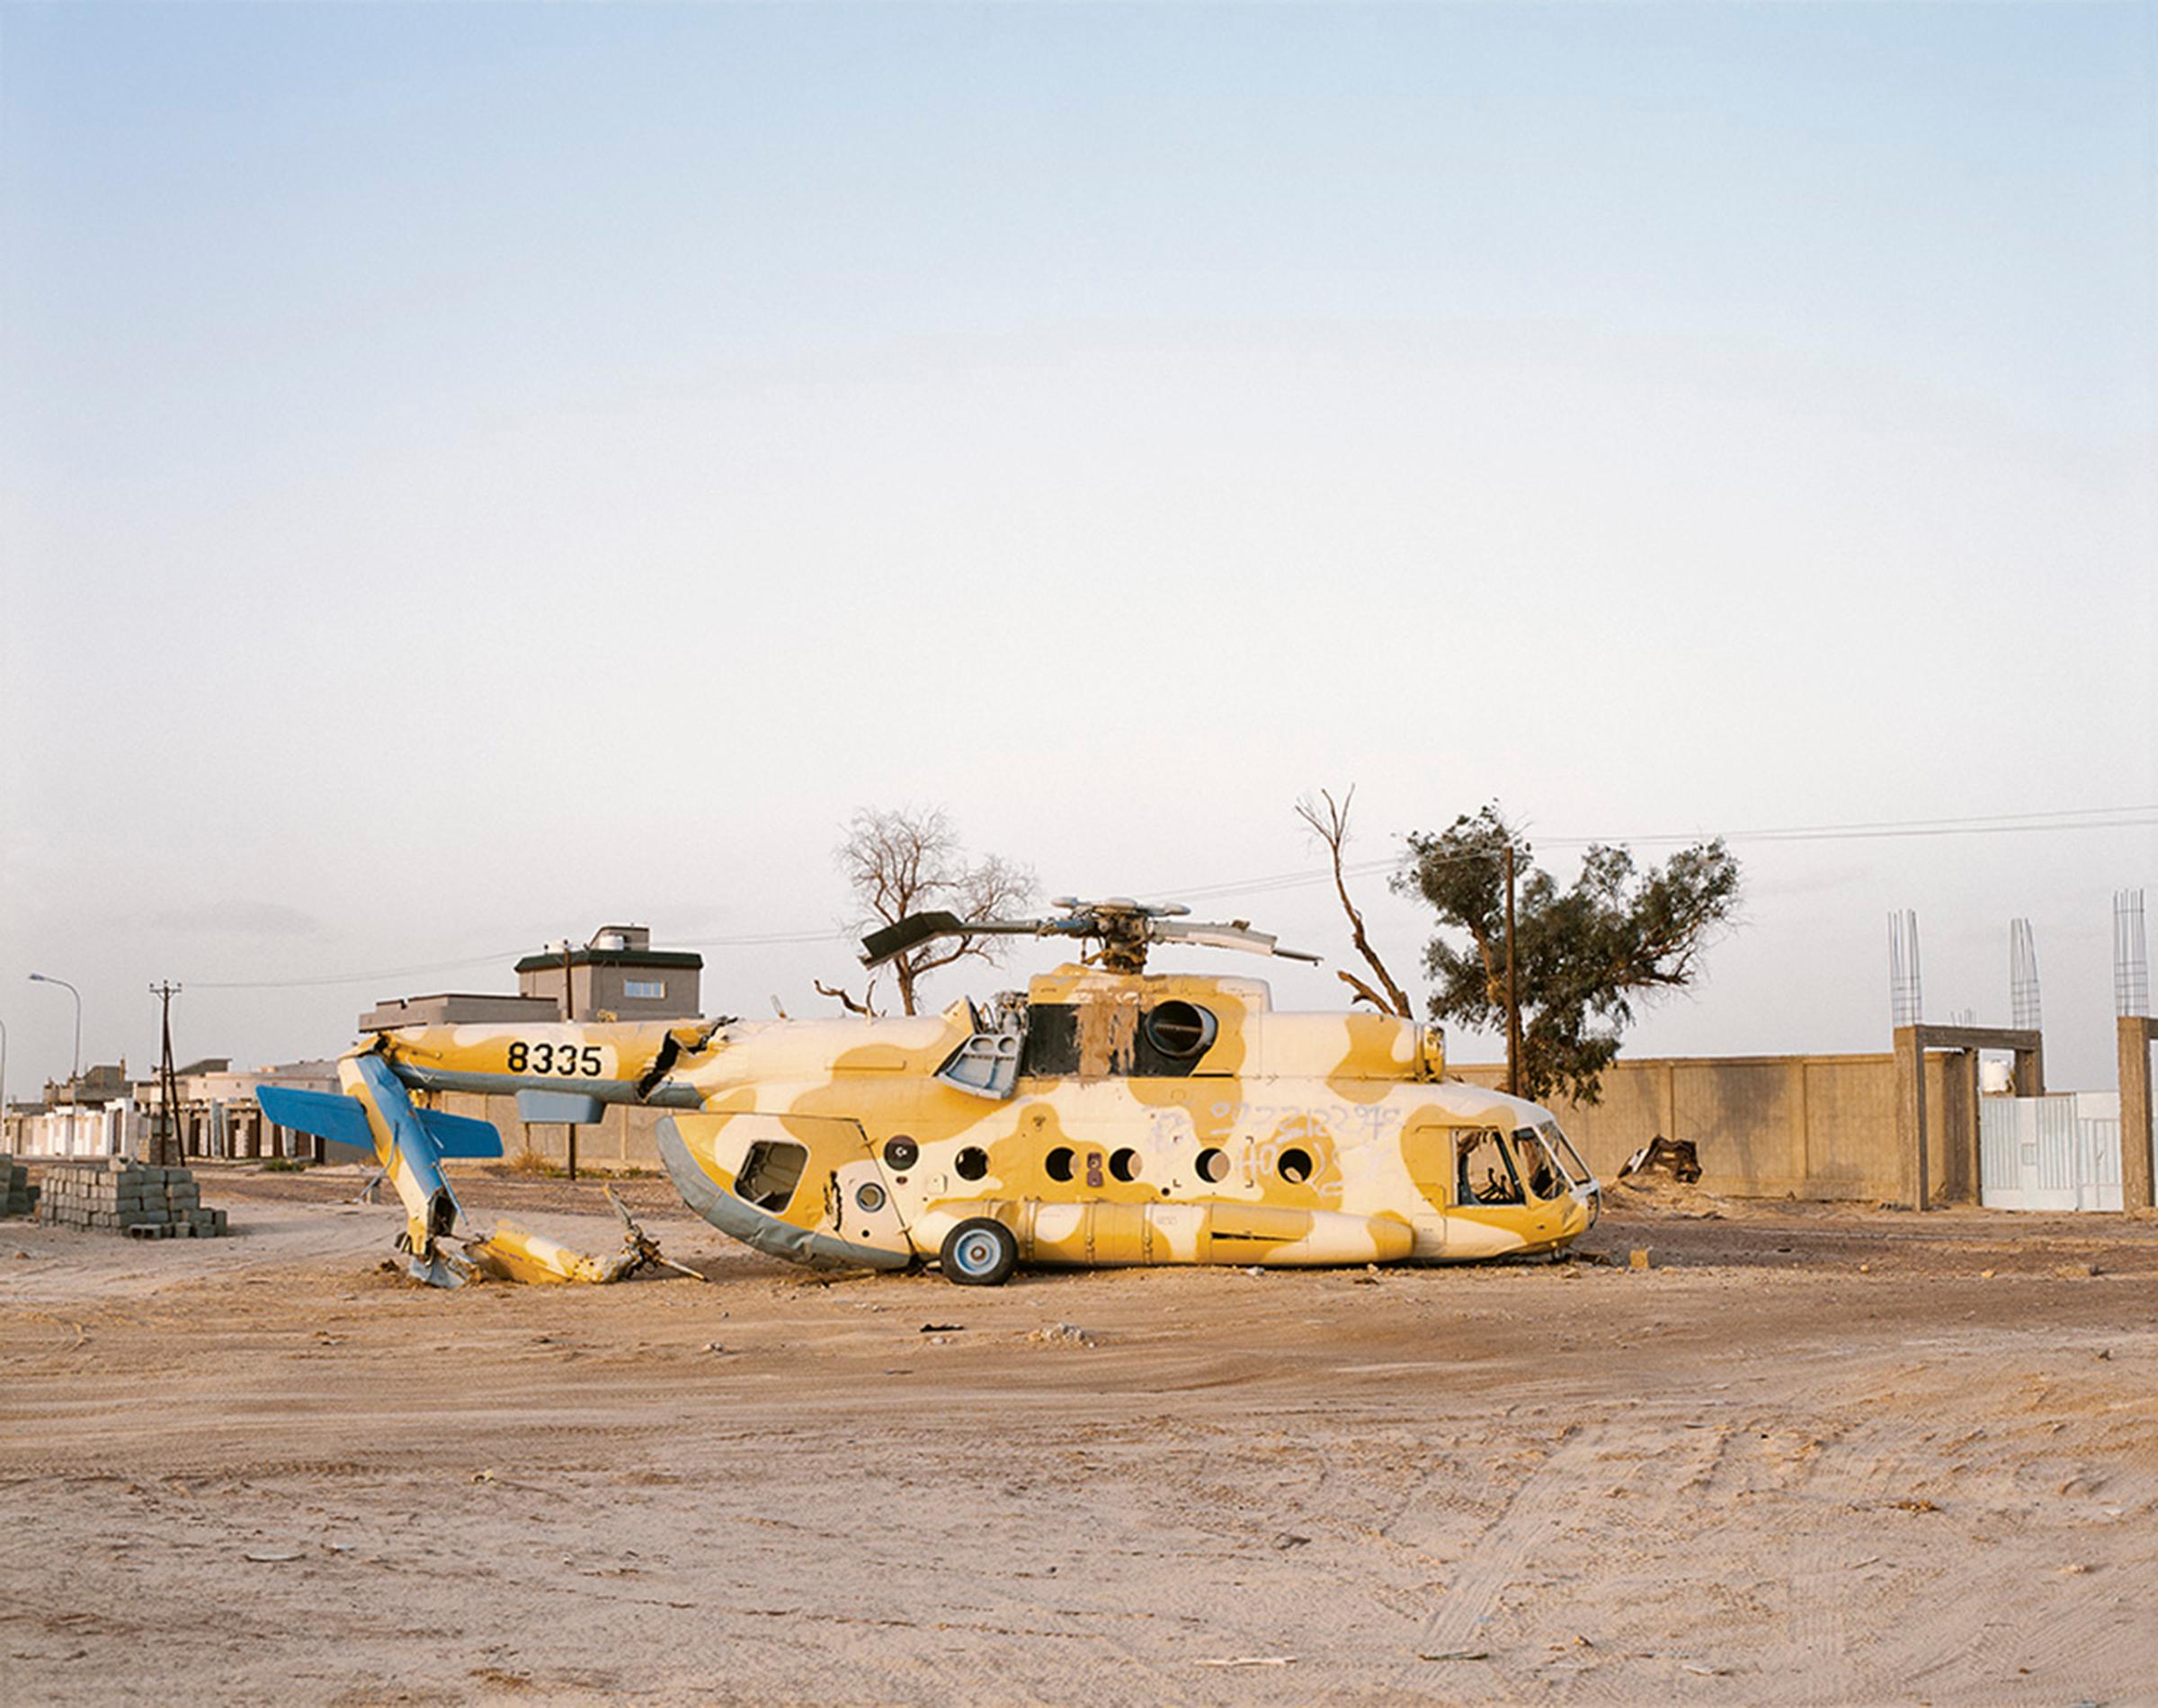 Murzuk, Southern Libya, March 2015.The remains of a Libyan National Army MI8 helicopter that crash-landed from overloading in 2012, during the reconciliation tour operated in Southern Libya by the Tripoli authorities.